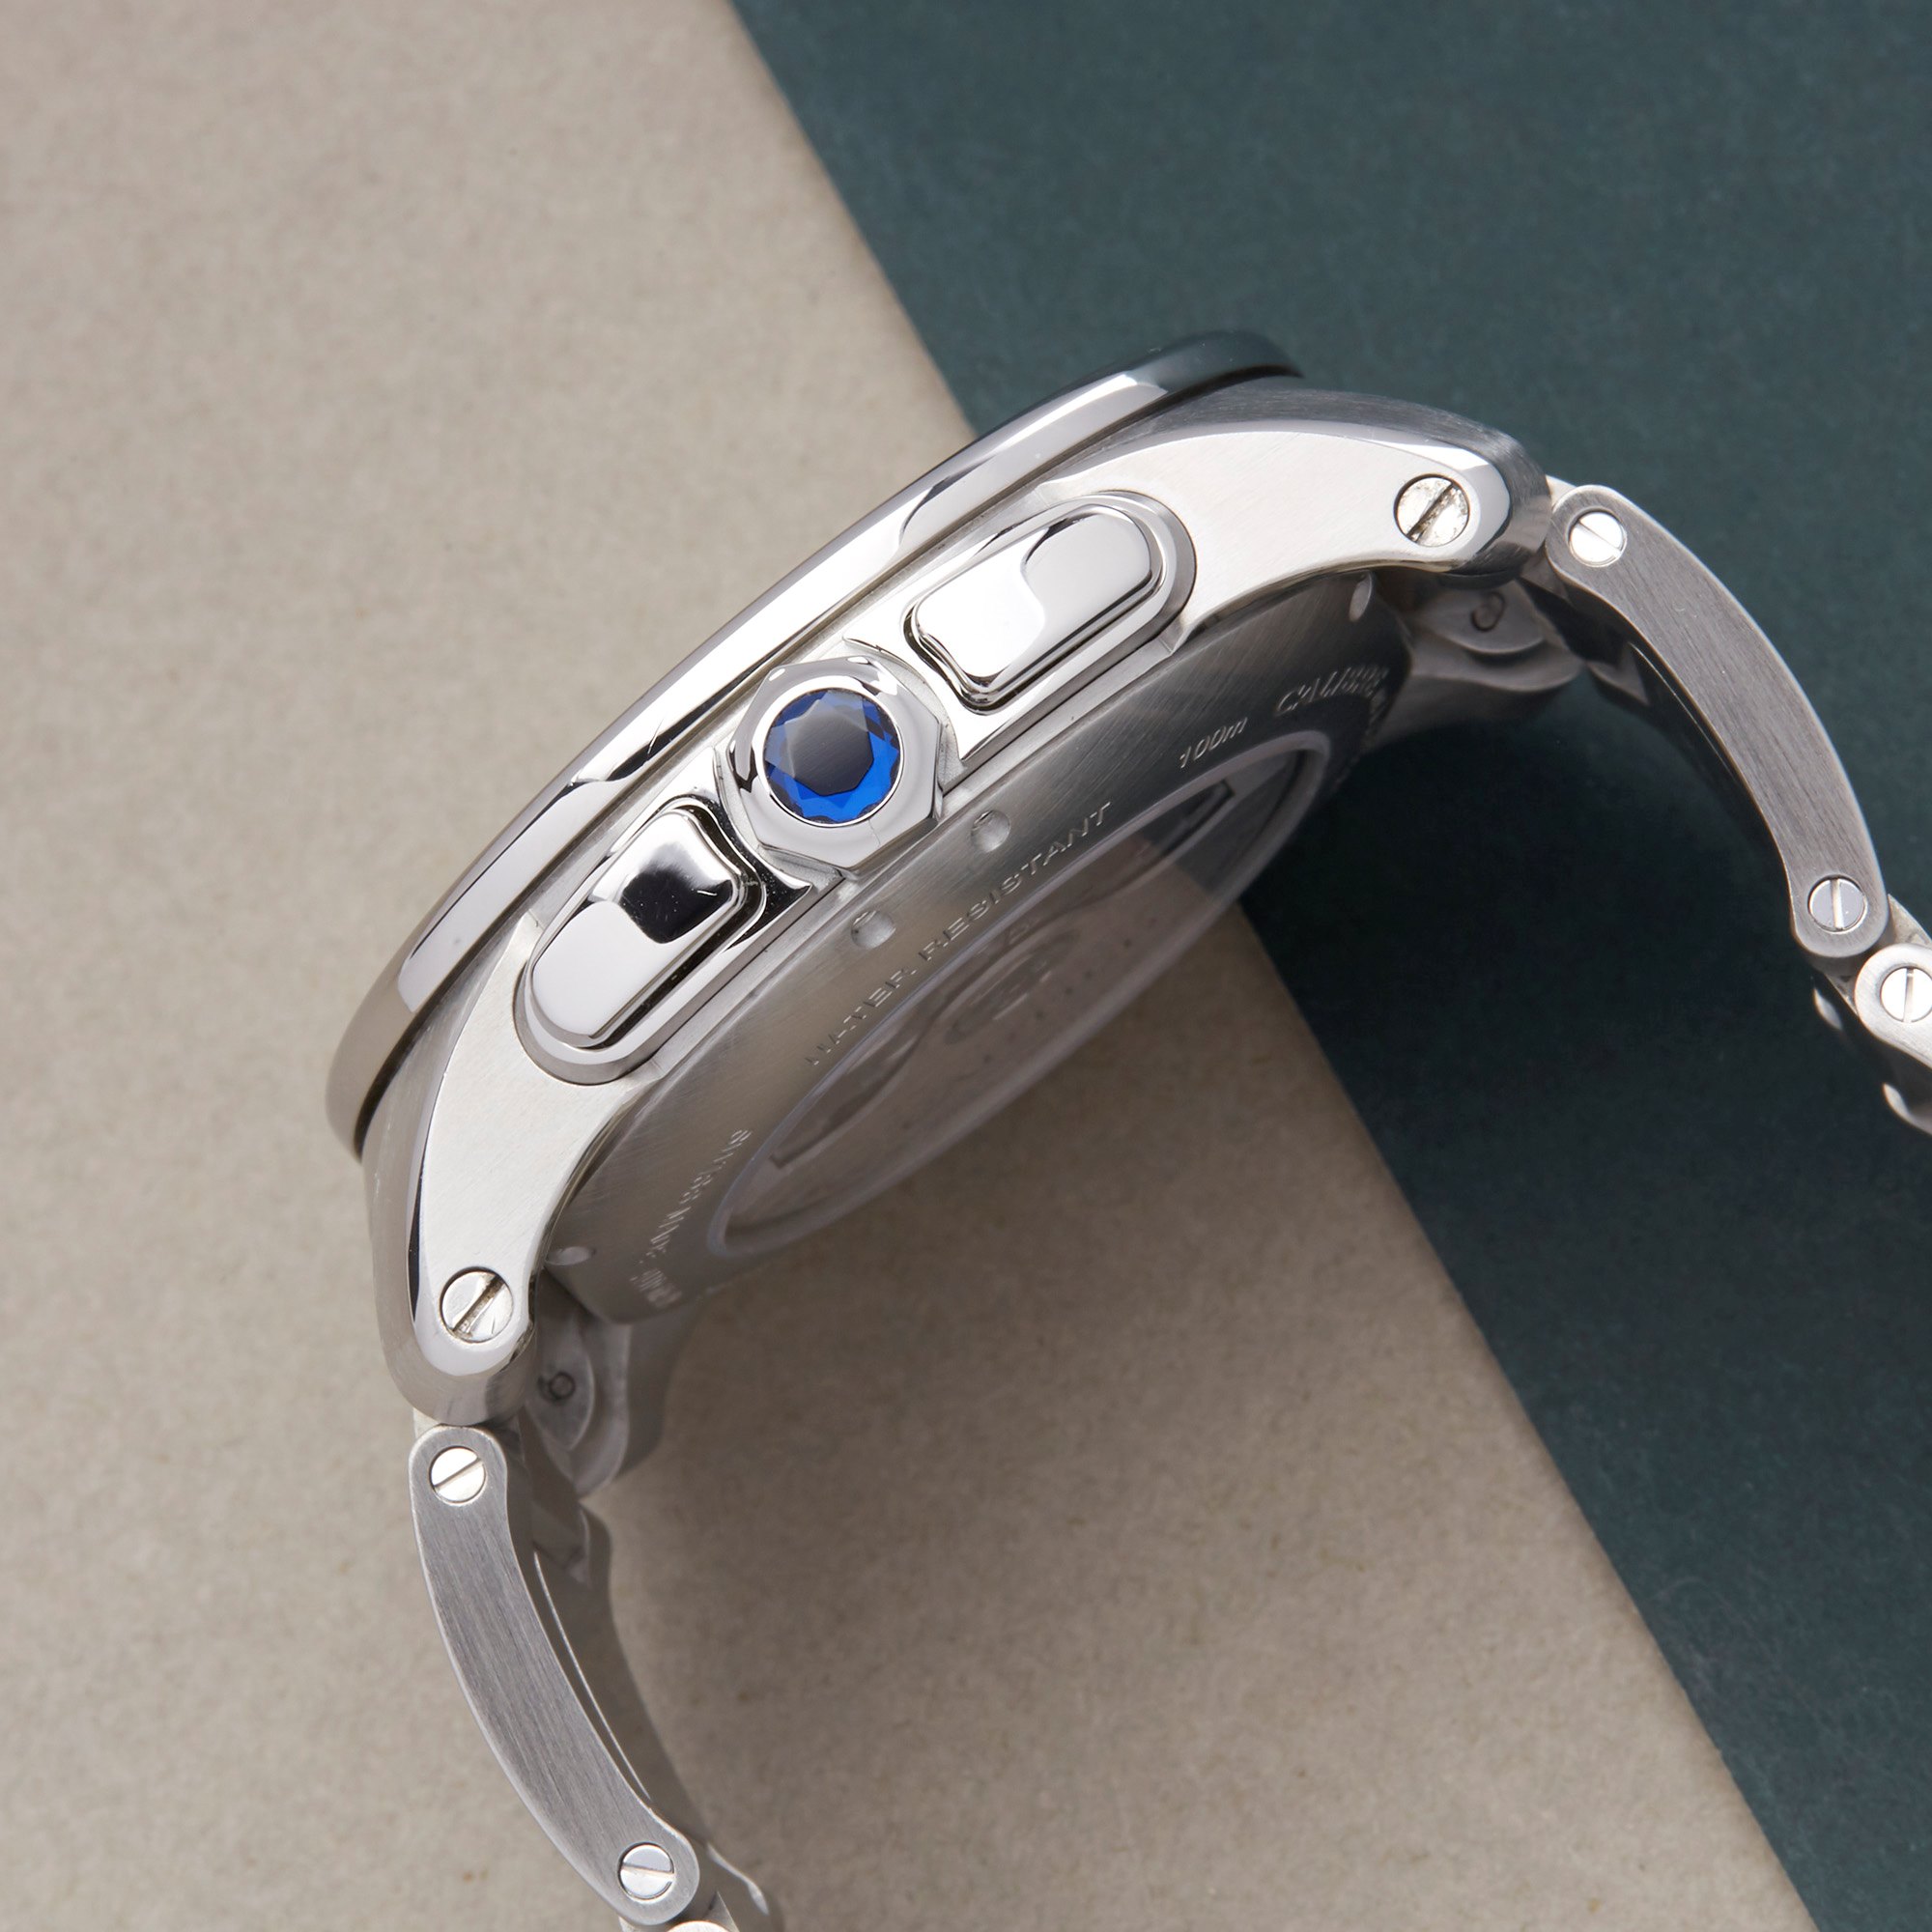 Cartier Calibre de Cartier Chronograph Stainless Steel Watch W7100045 or 3578 - Image 3 of 10